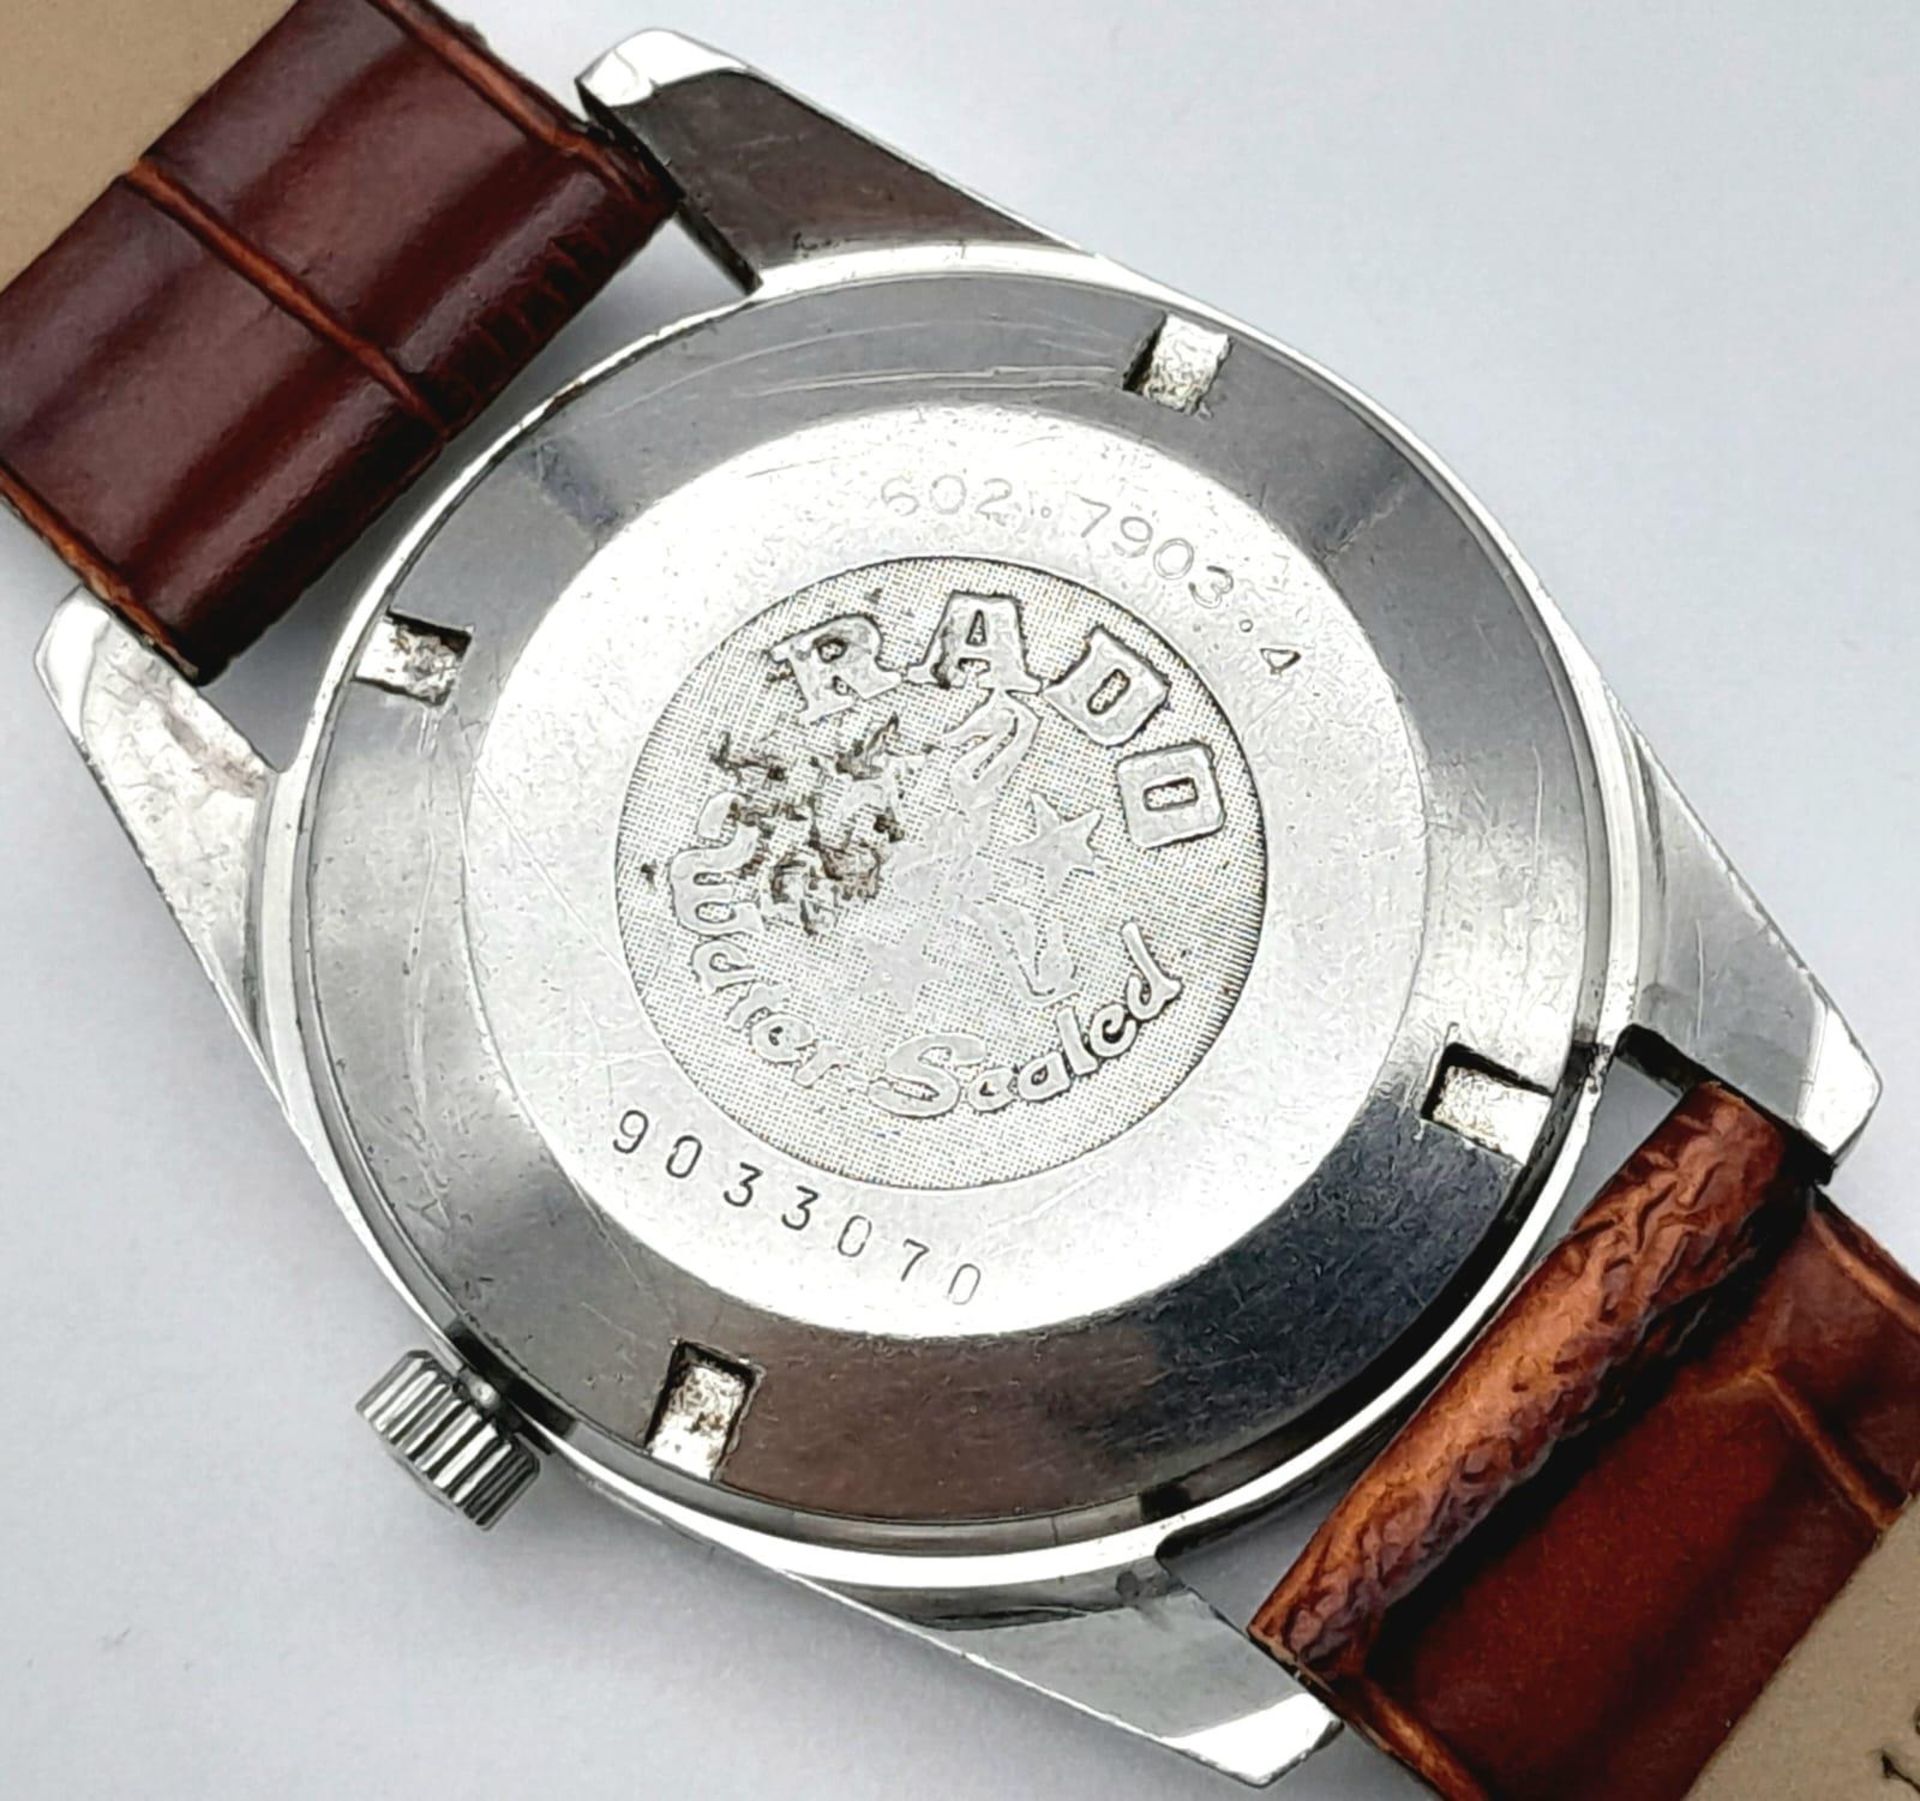 A Vintage Rado Green Horse Gents Watch. Brown leather strap. Silver tone dial with date window. - Image 4 of 4